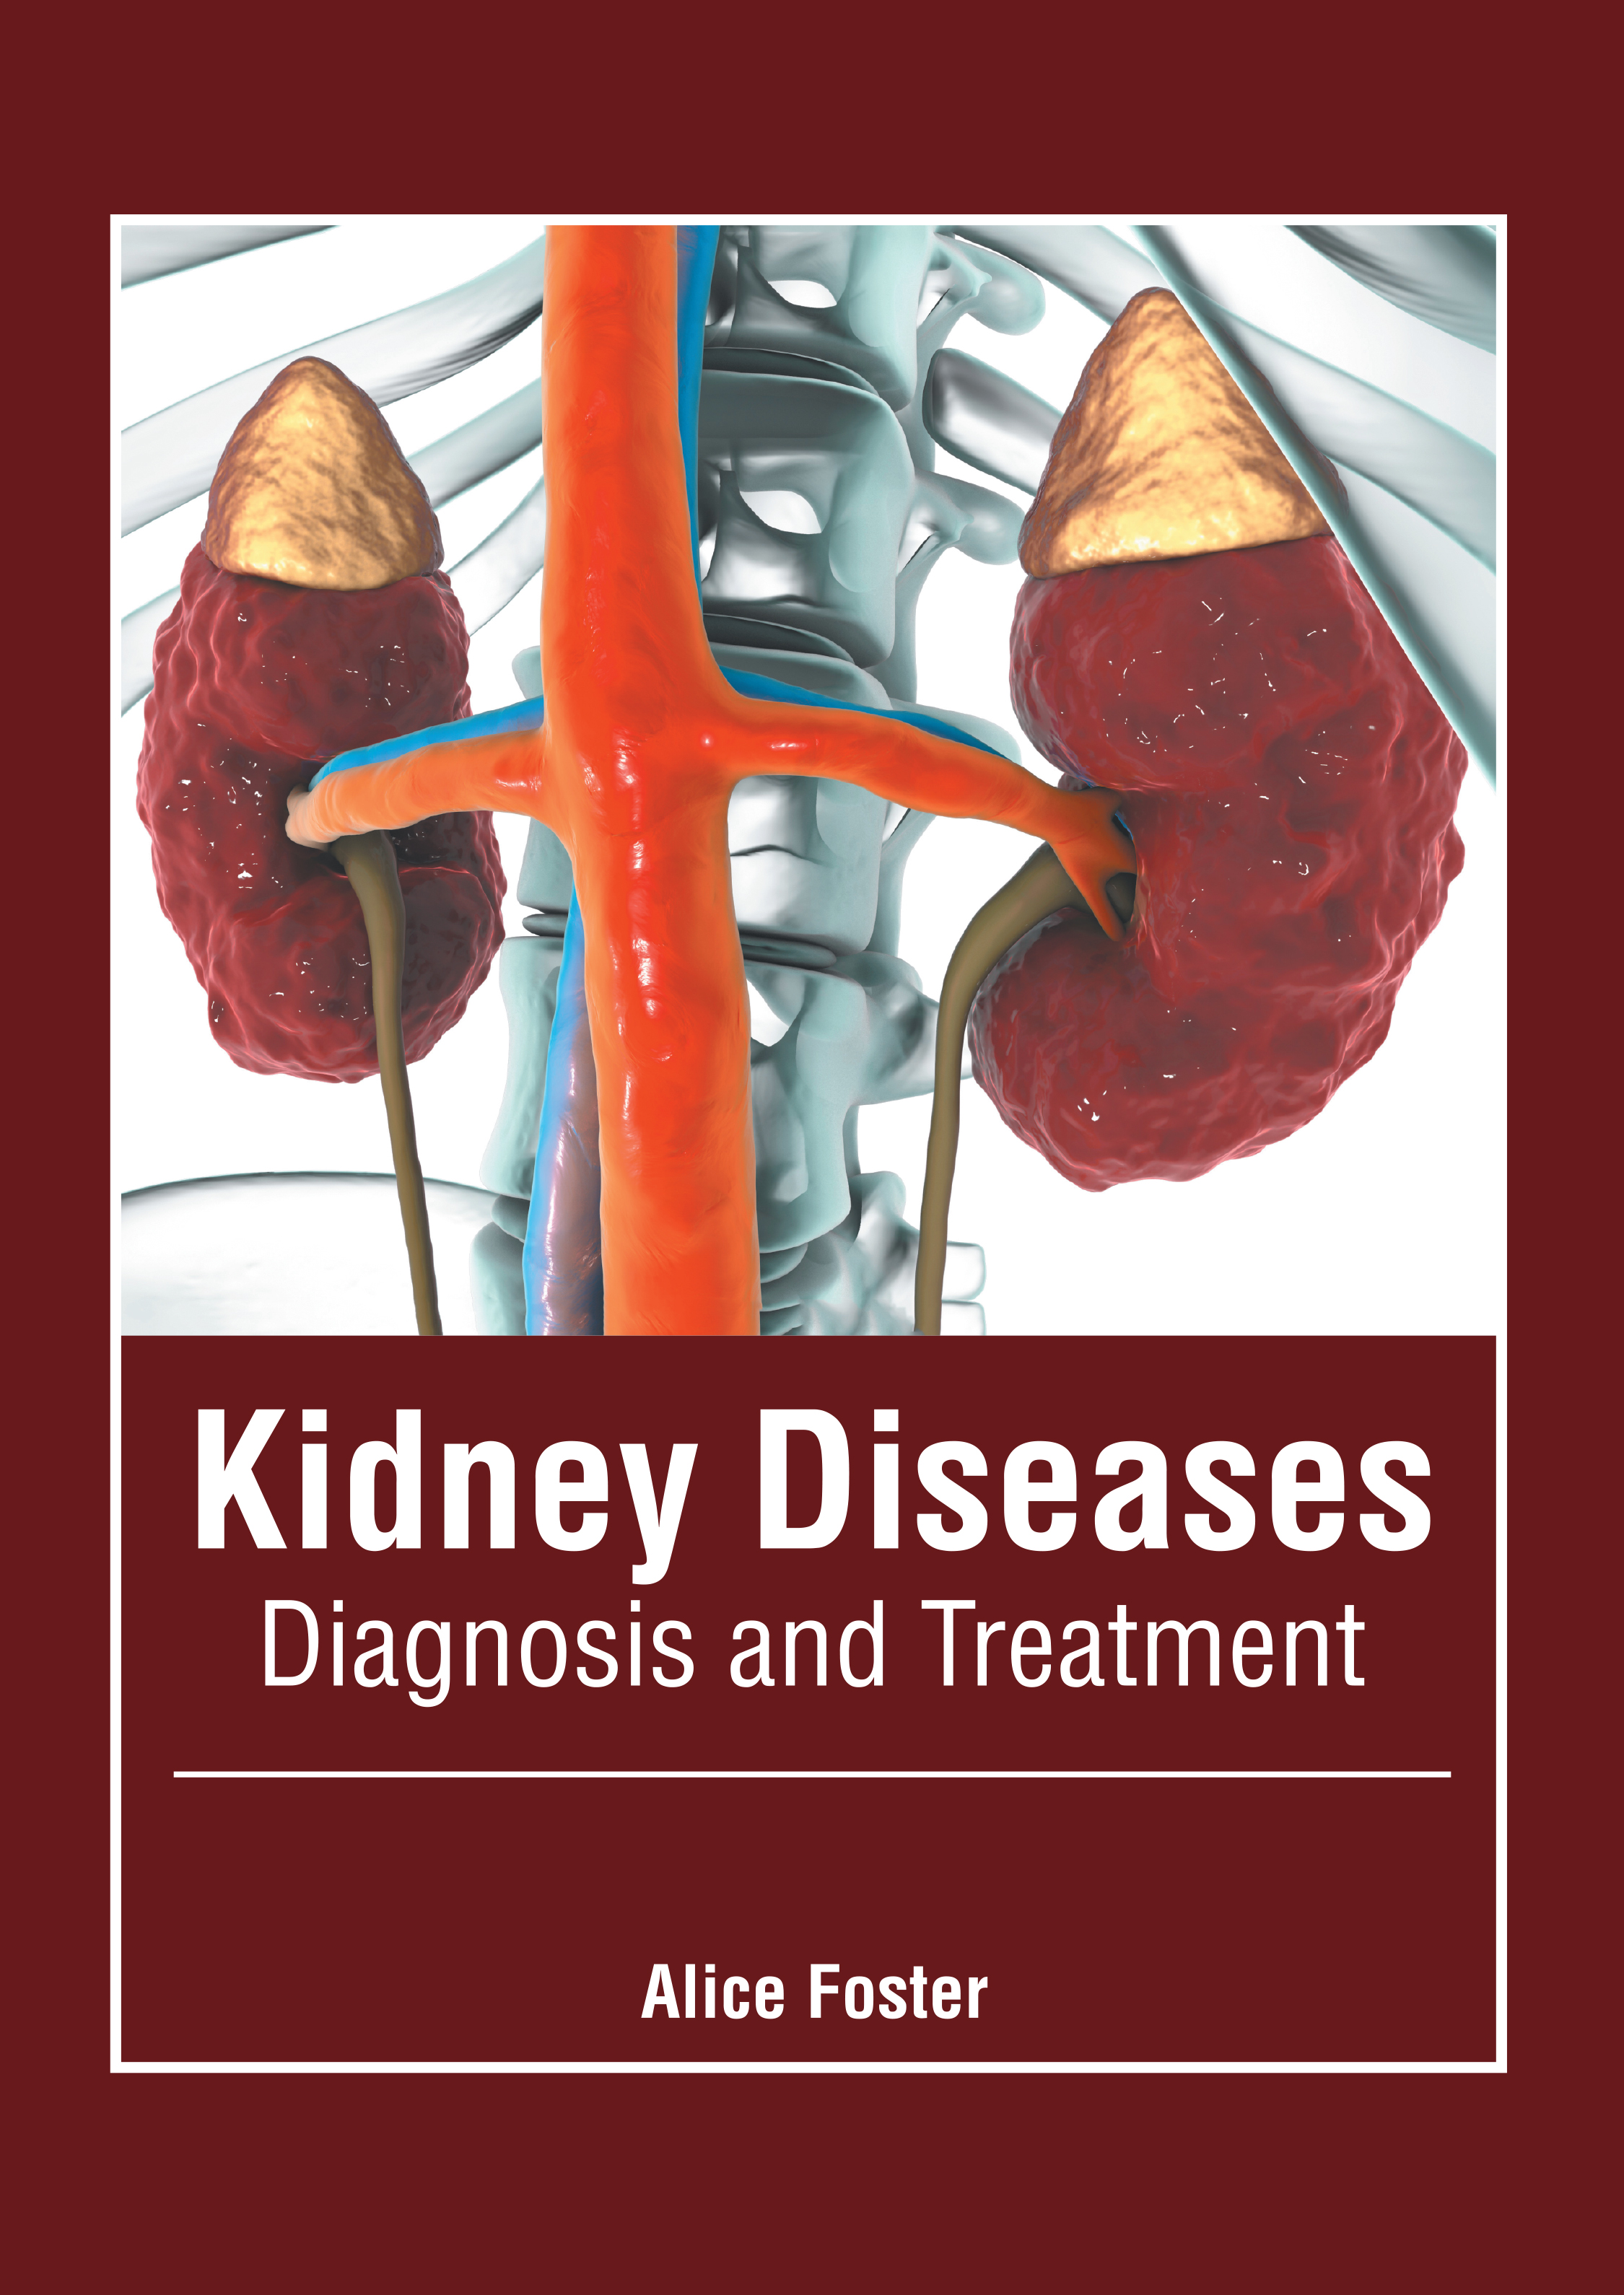 KIDNEY DISEASES: DIAGNOSIS AND TREATMENT